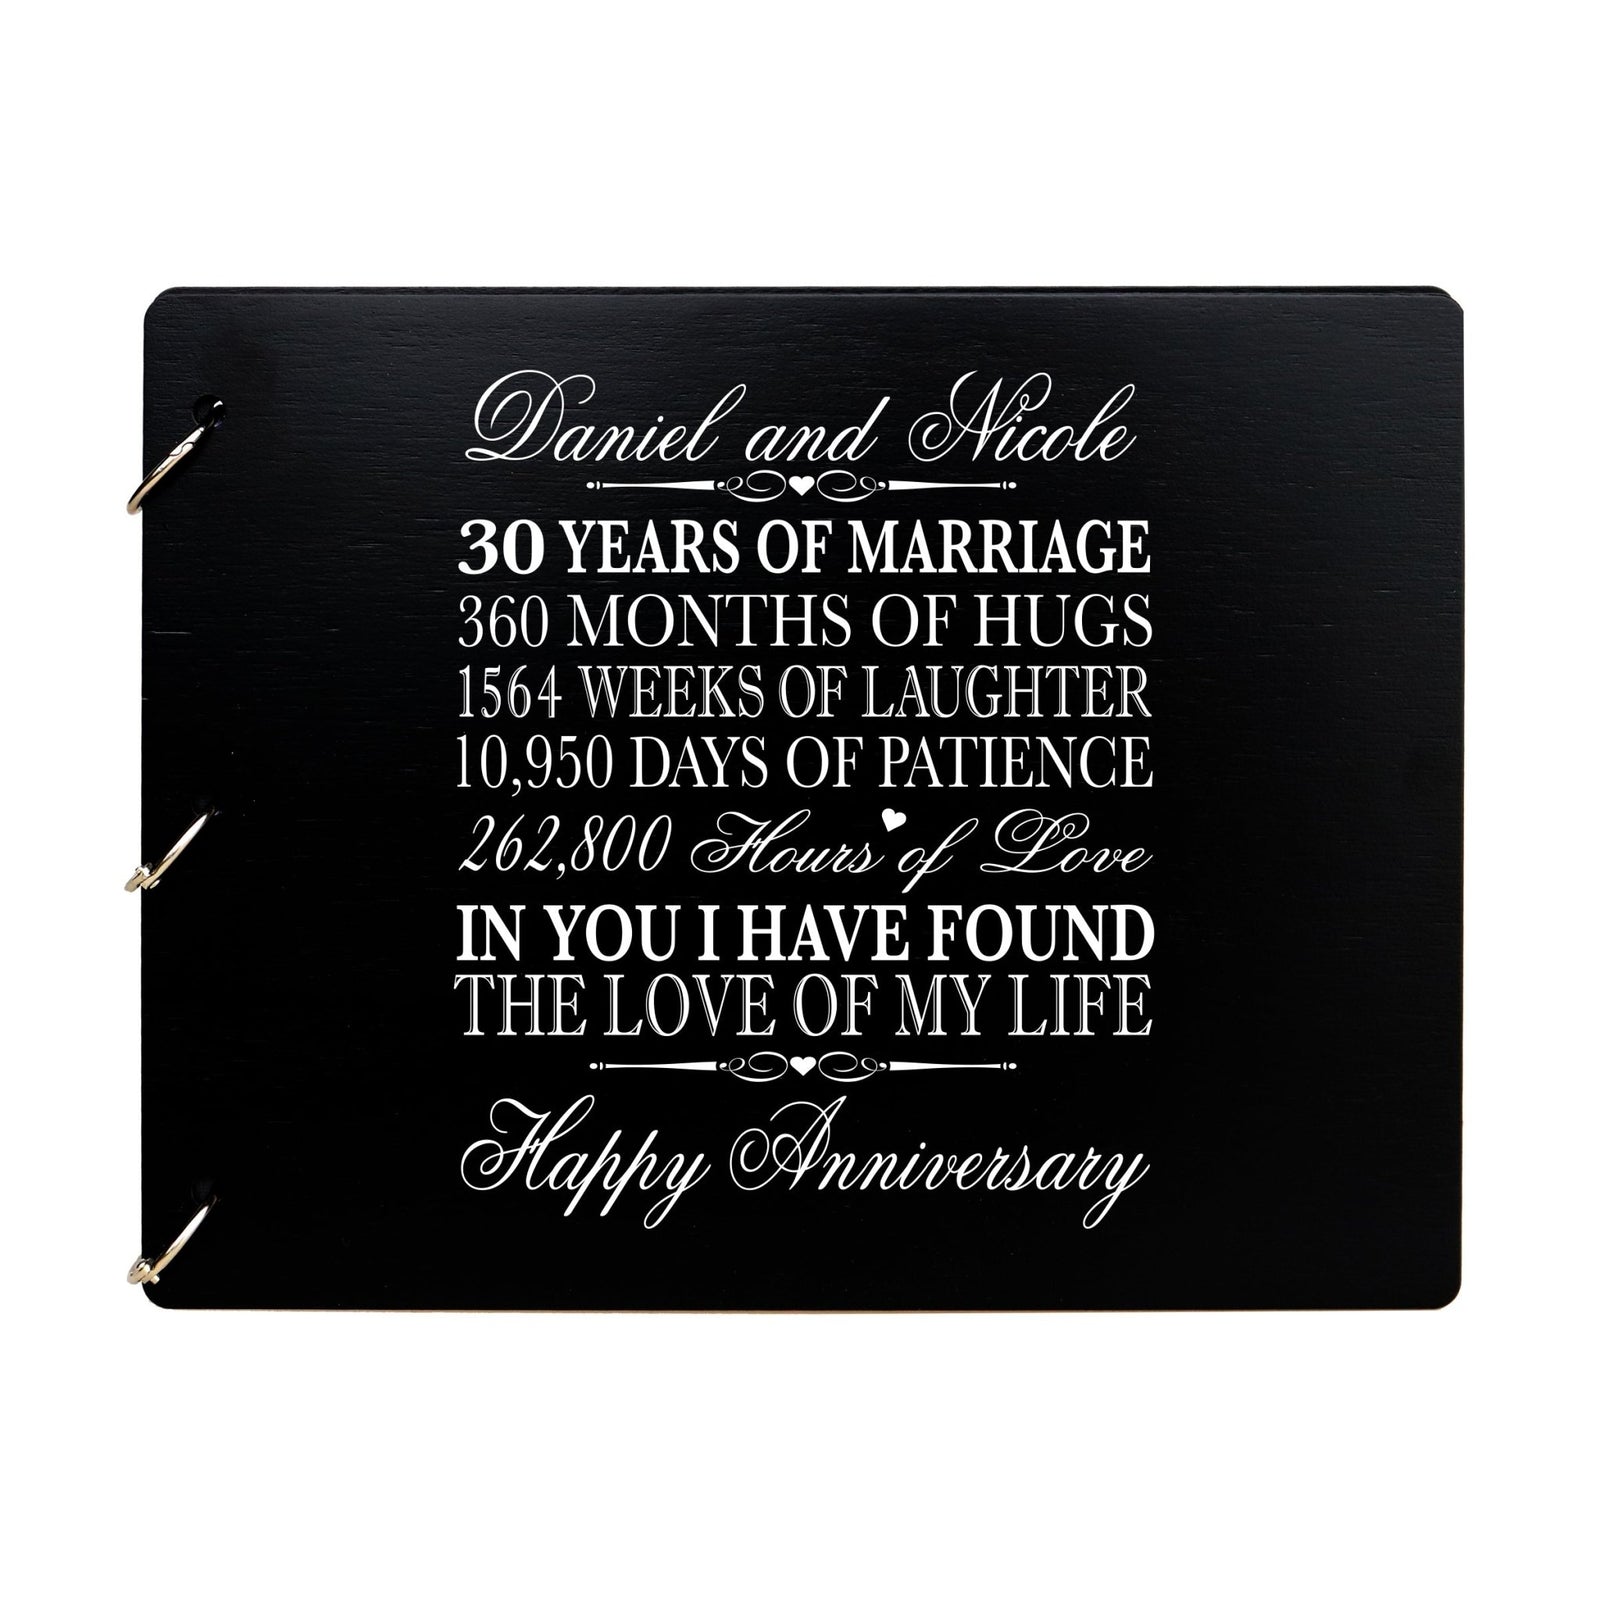 Personalized Guest Book Sign for 30th Wedding Anniversary - Love of My Life - LifeSong Milestones